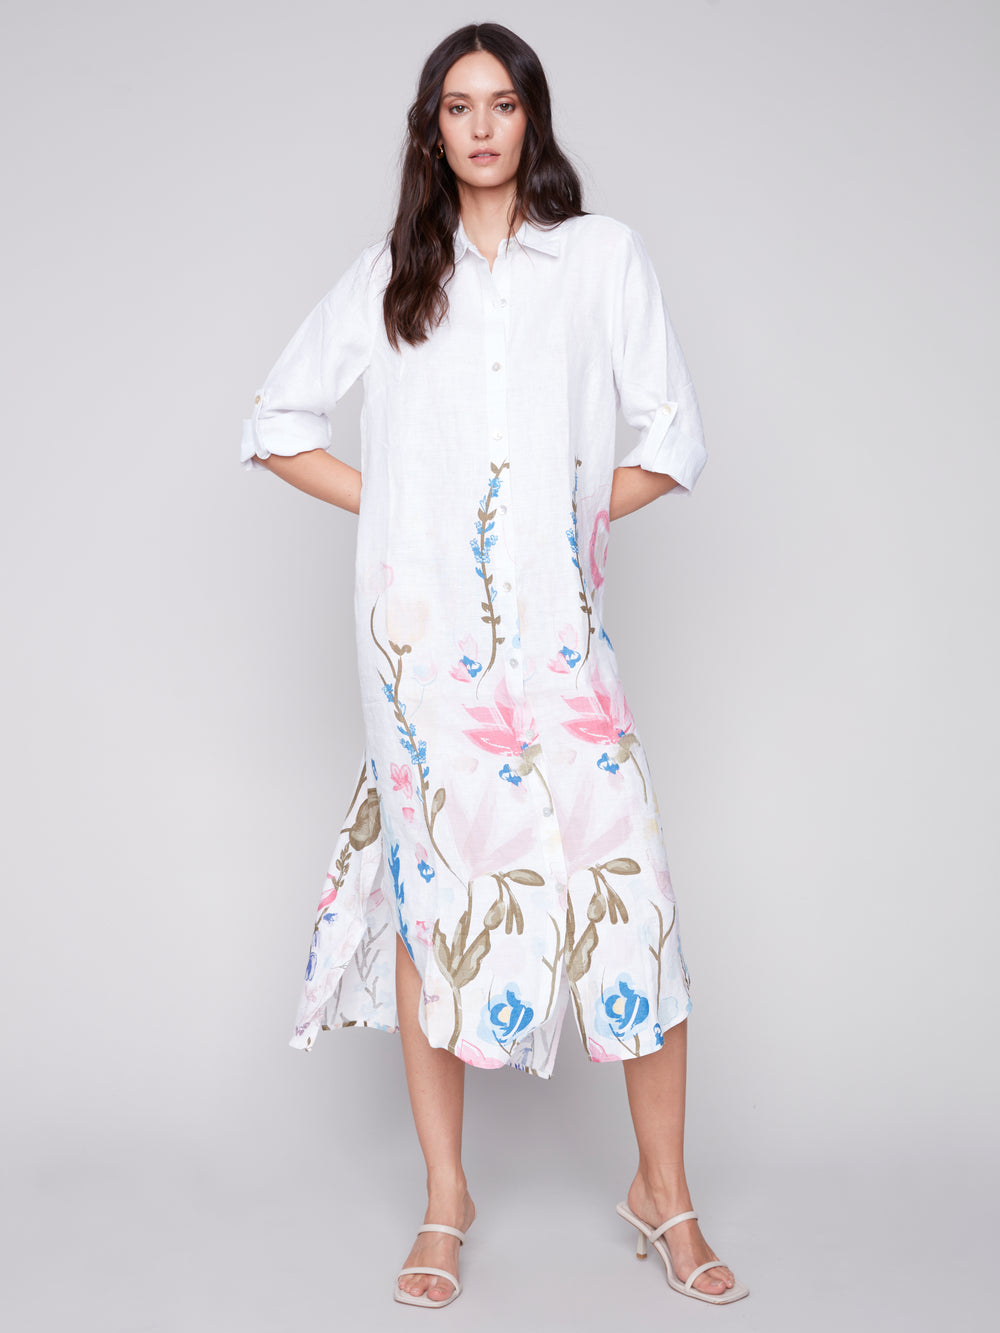 Charlie B spring 2024 women's casual linen long blouse duster shirt dress with floral print - front